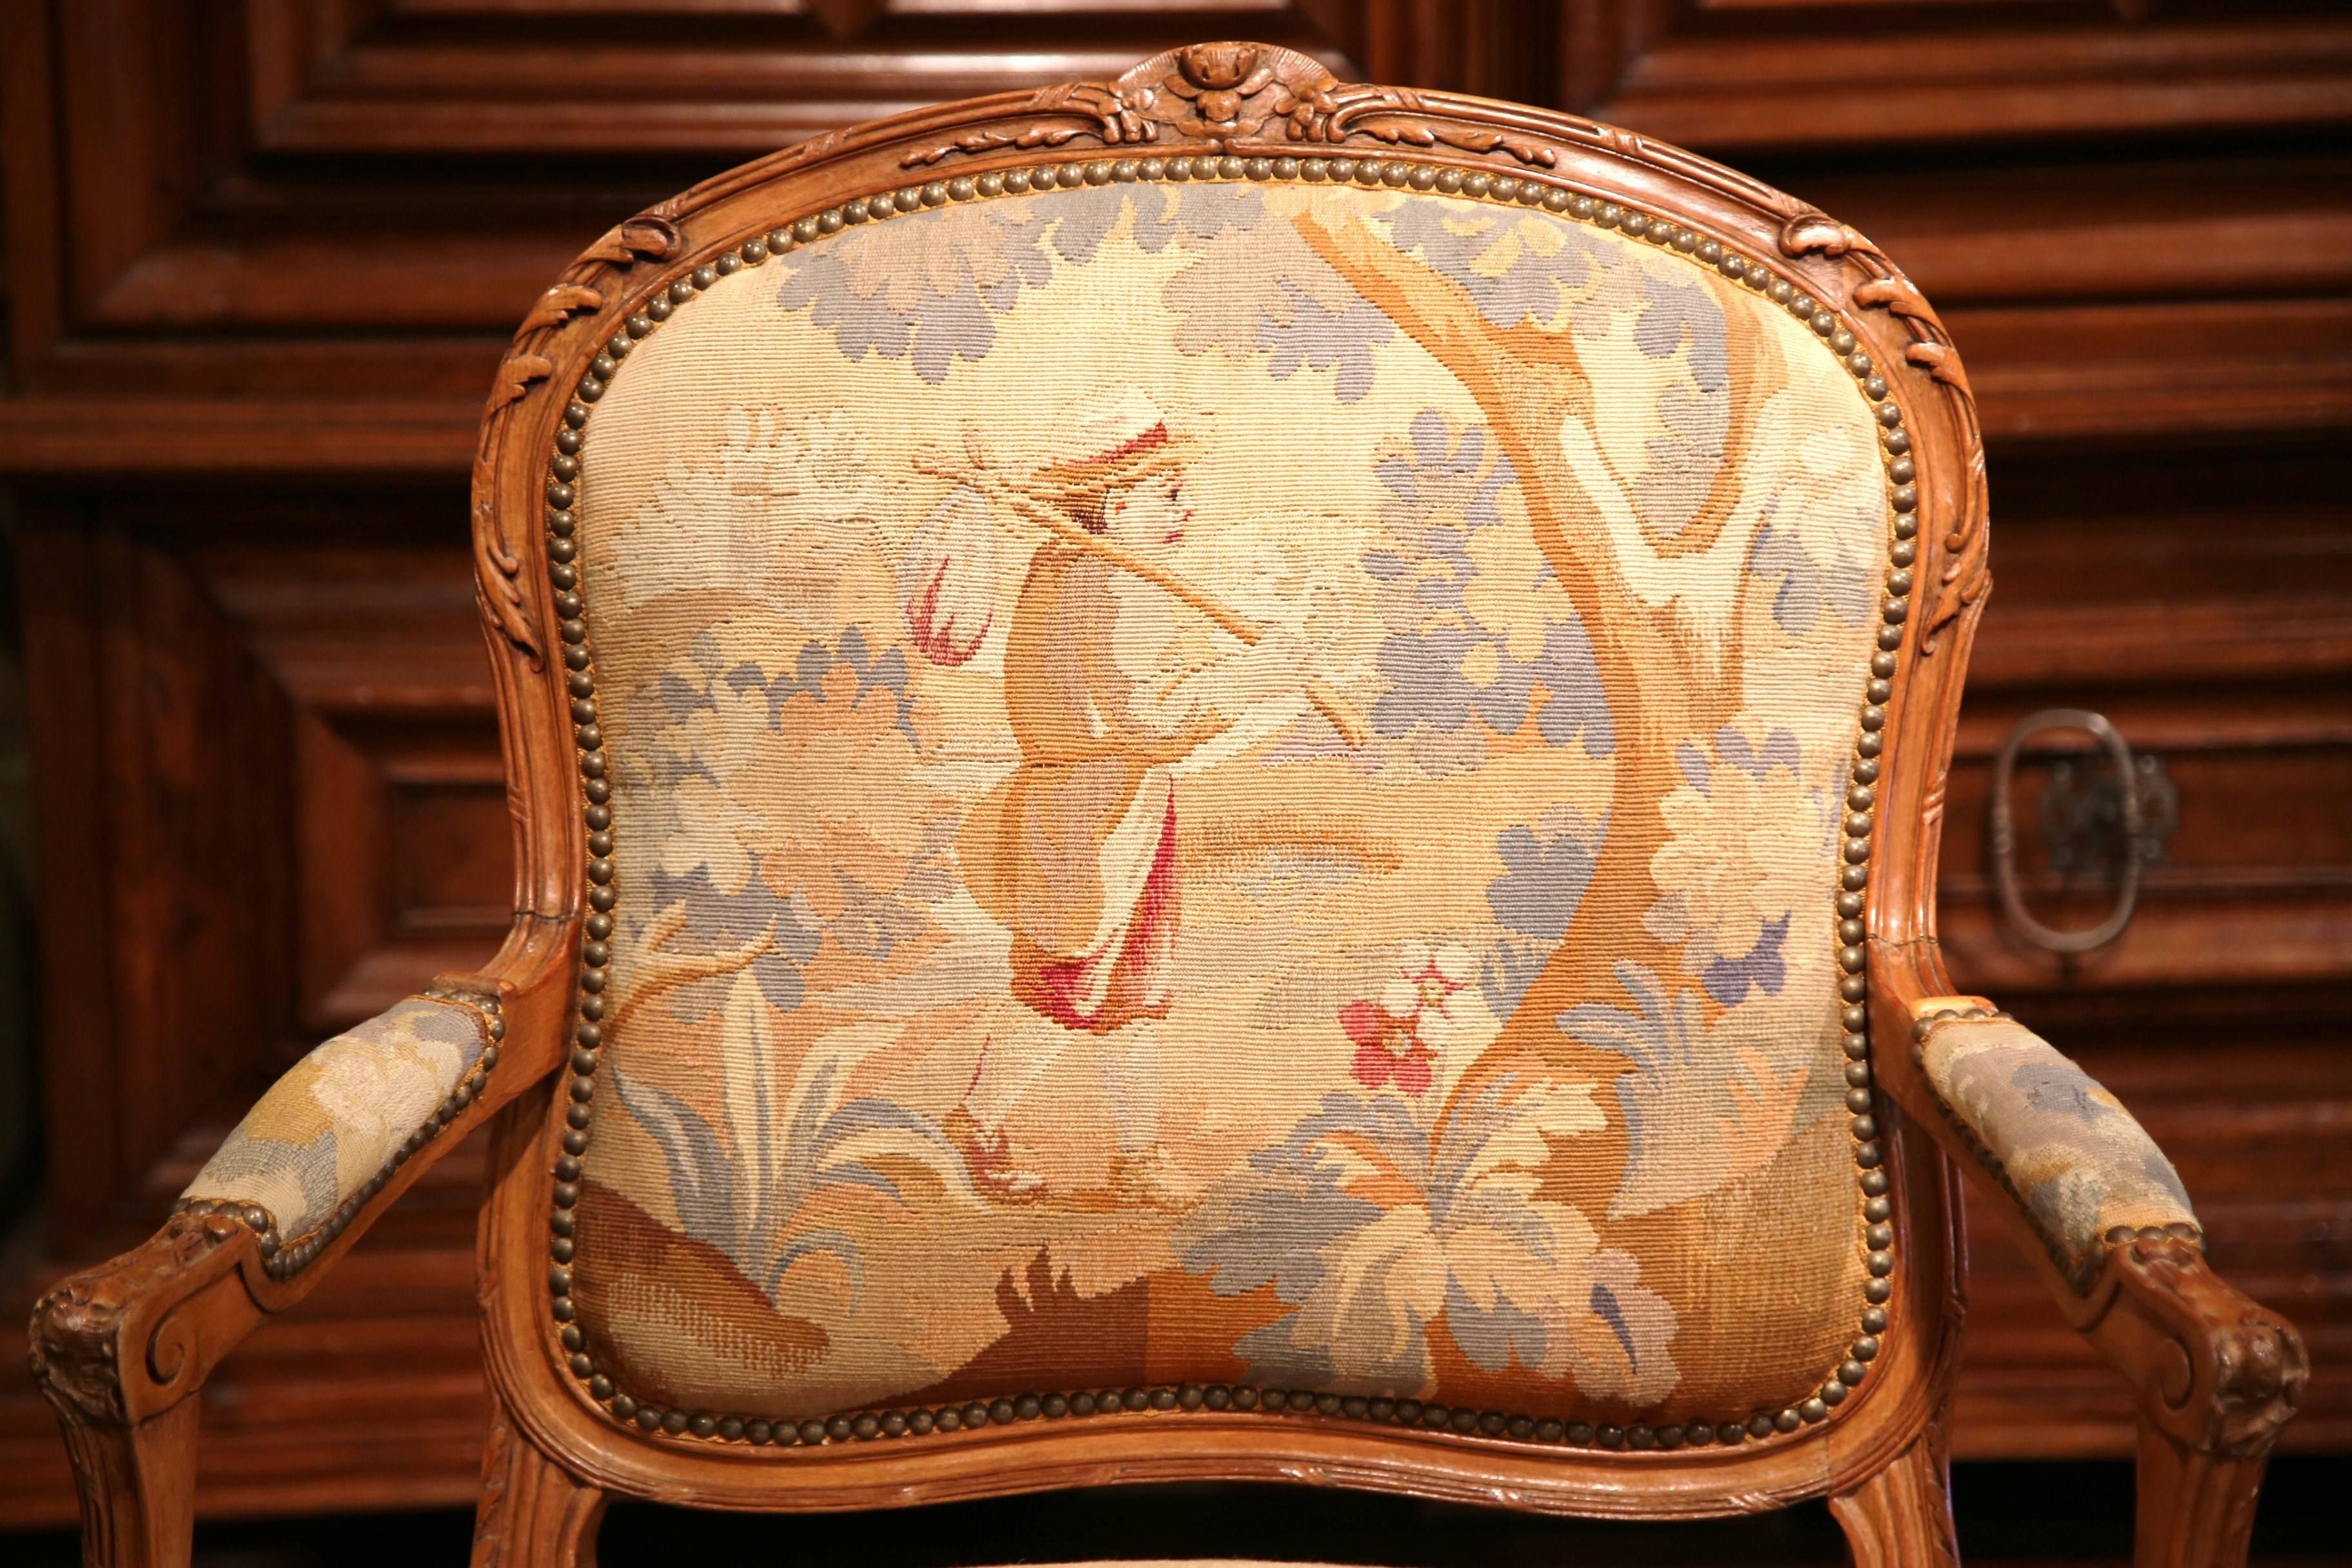 This elegant, antique fruitwood armchair was crafted in Lyon, France circa 1860. The chair has beautiful cabriole legs, carved armrests and a comfortable seat. The chair is upholstered in original Aubusson tapestry in a soft pastel color palette.